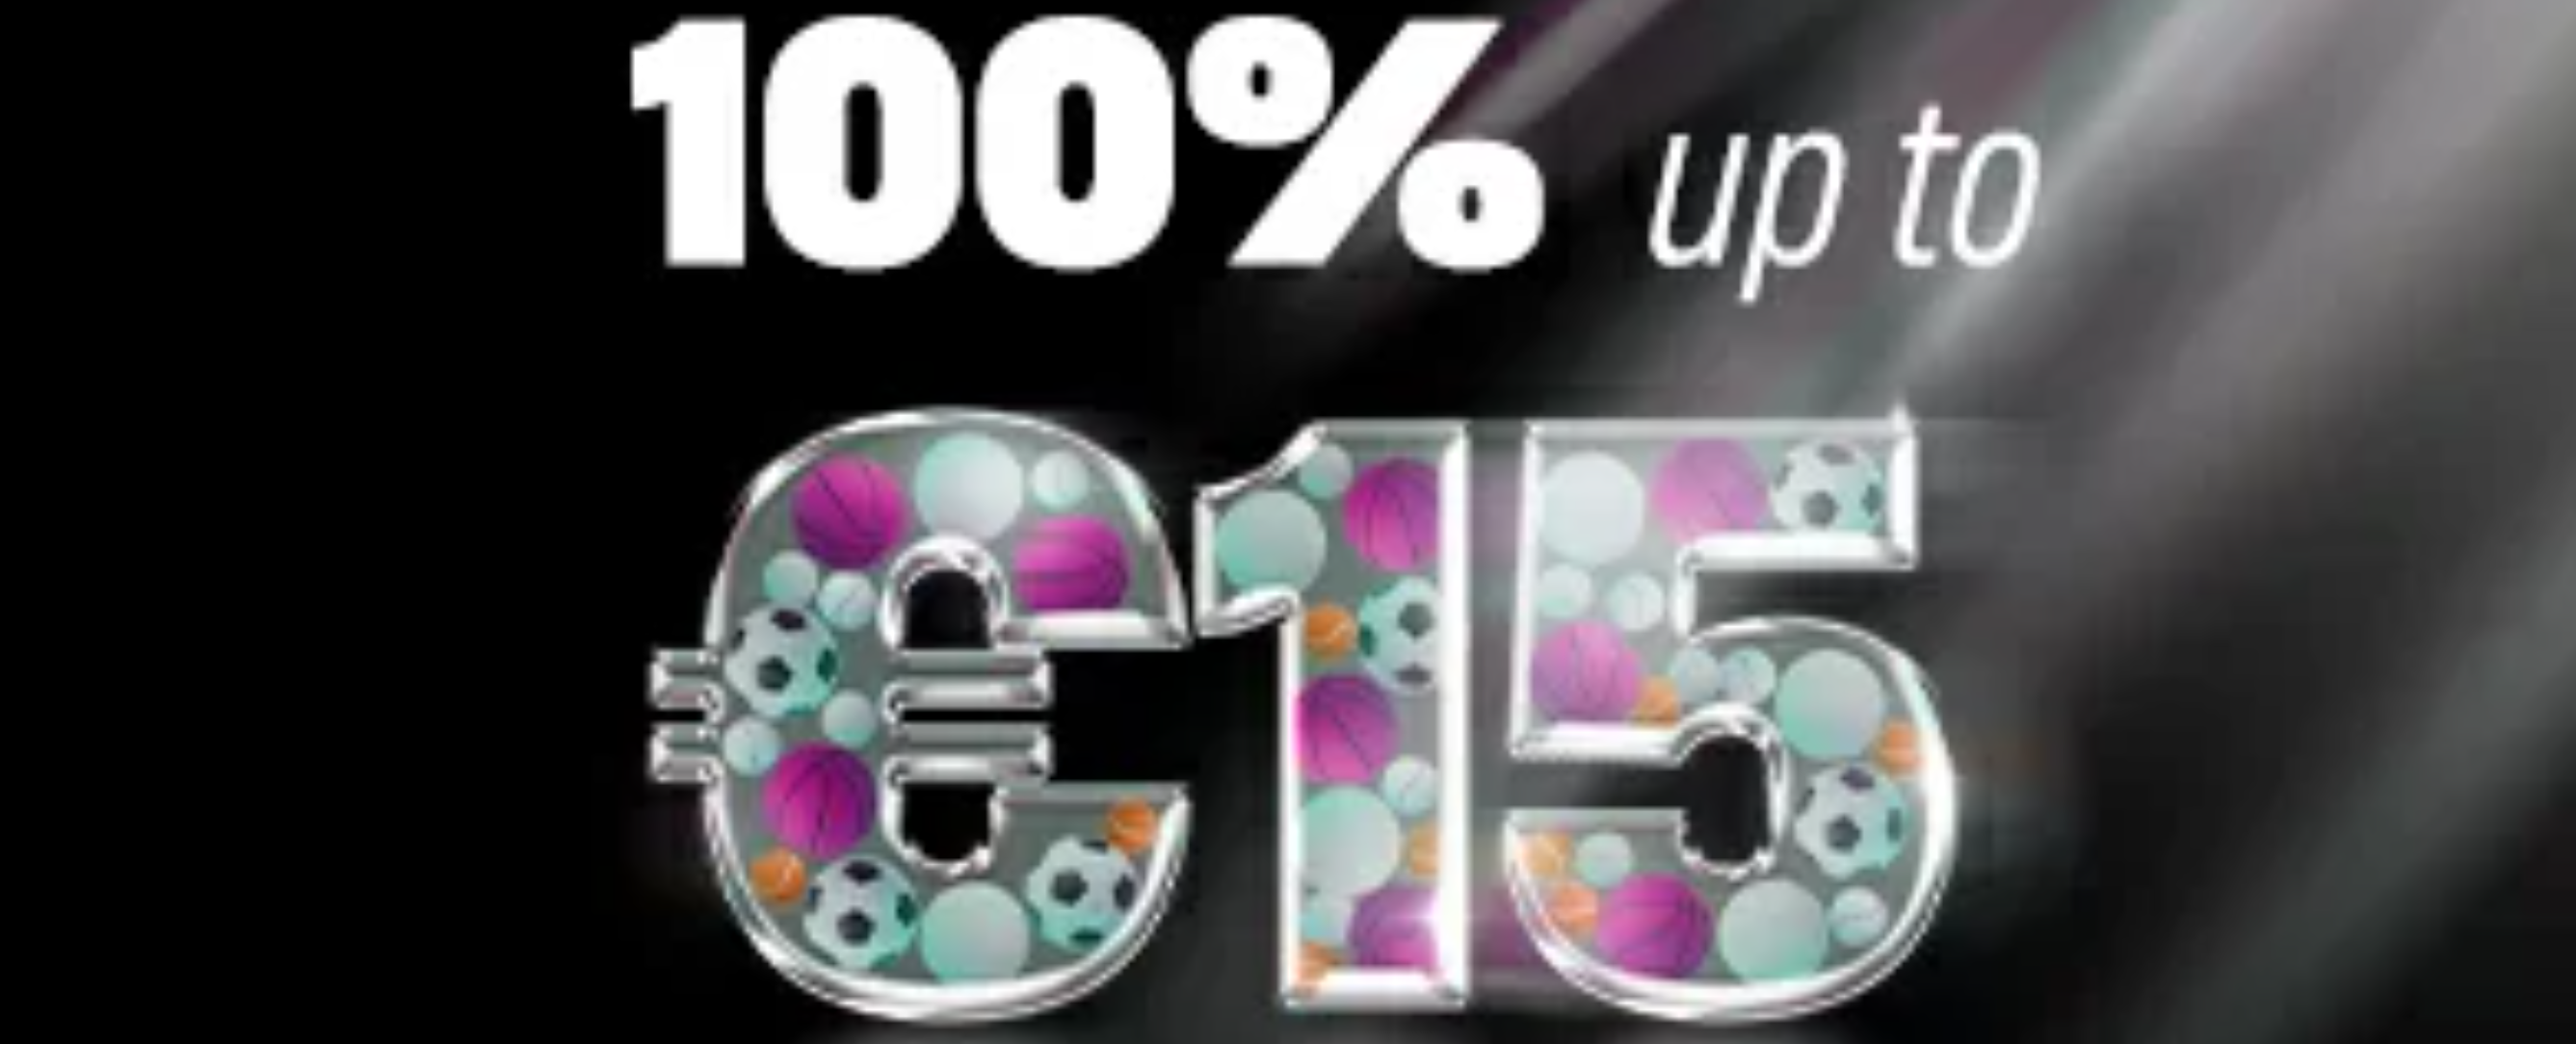 Vbet 100% up to €15 free bet offer